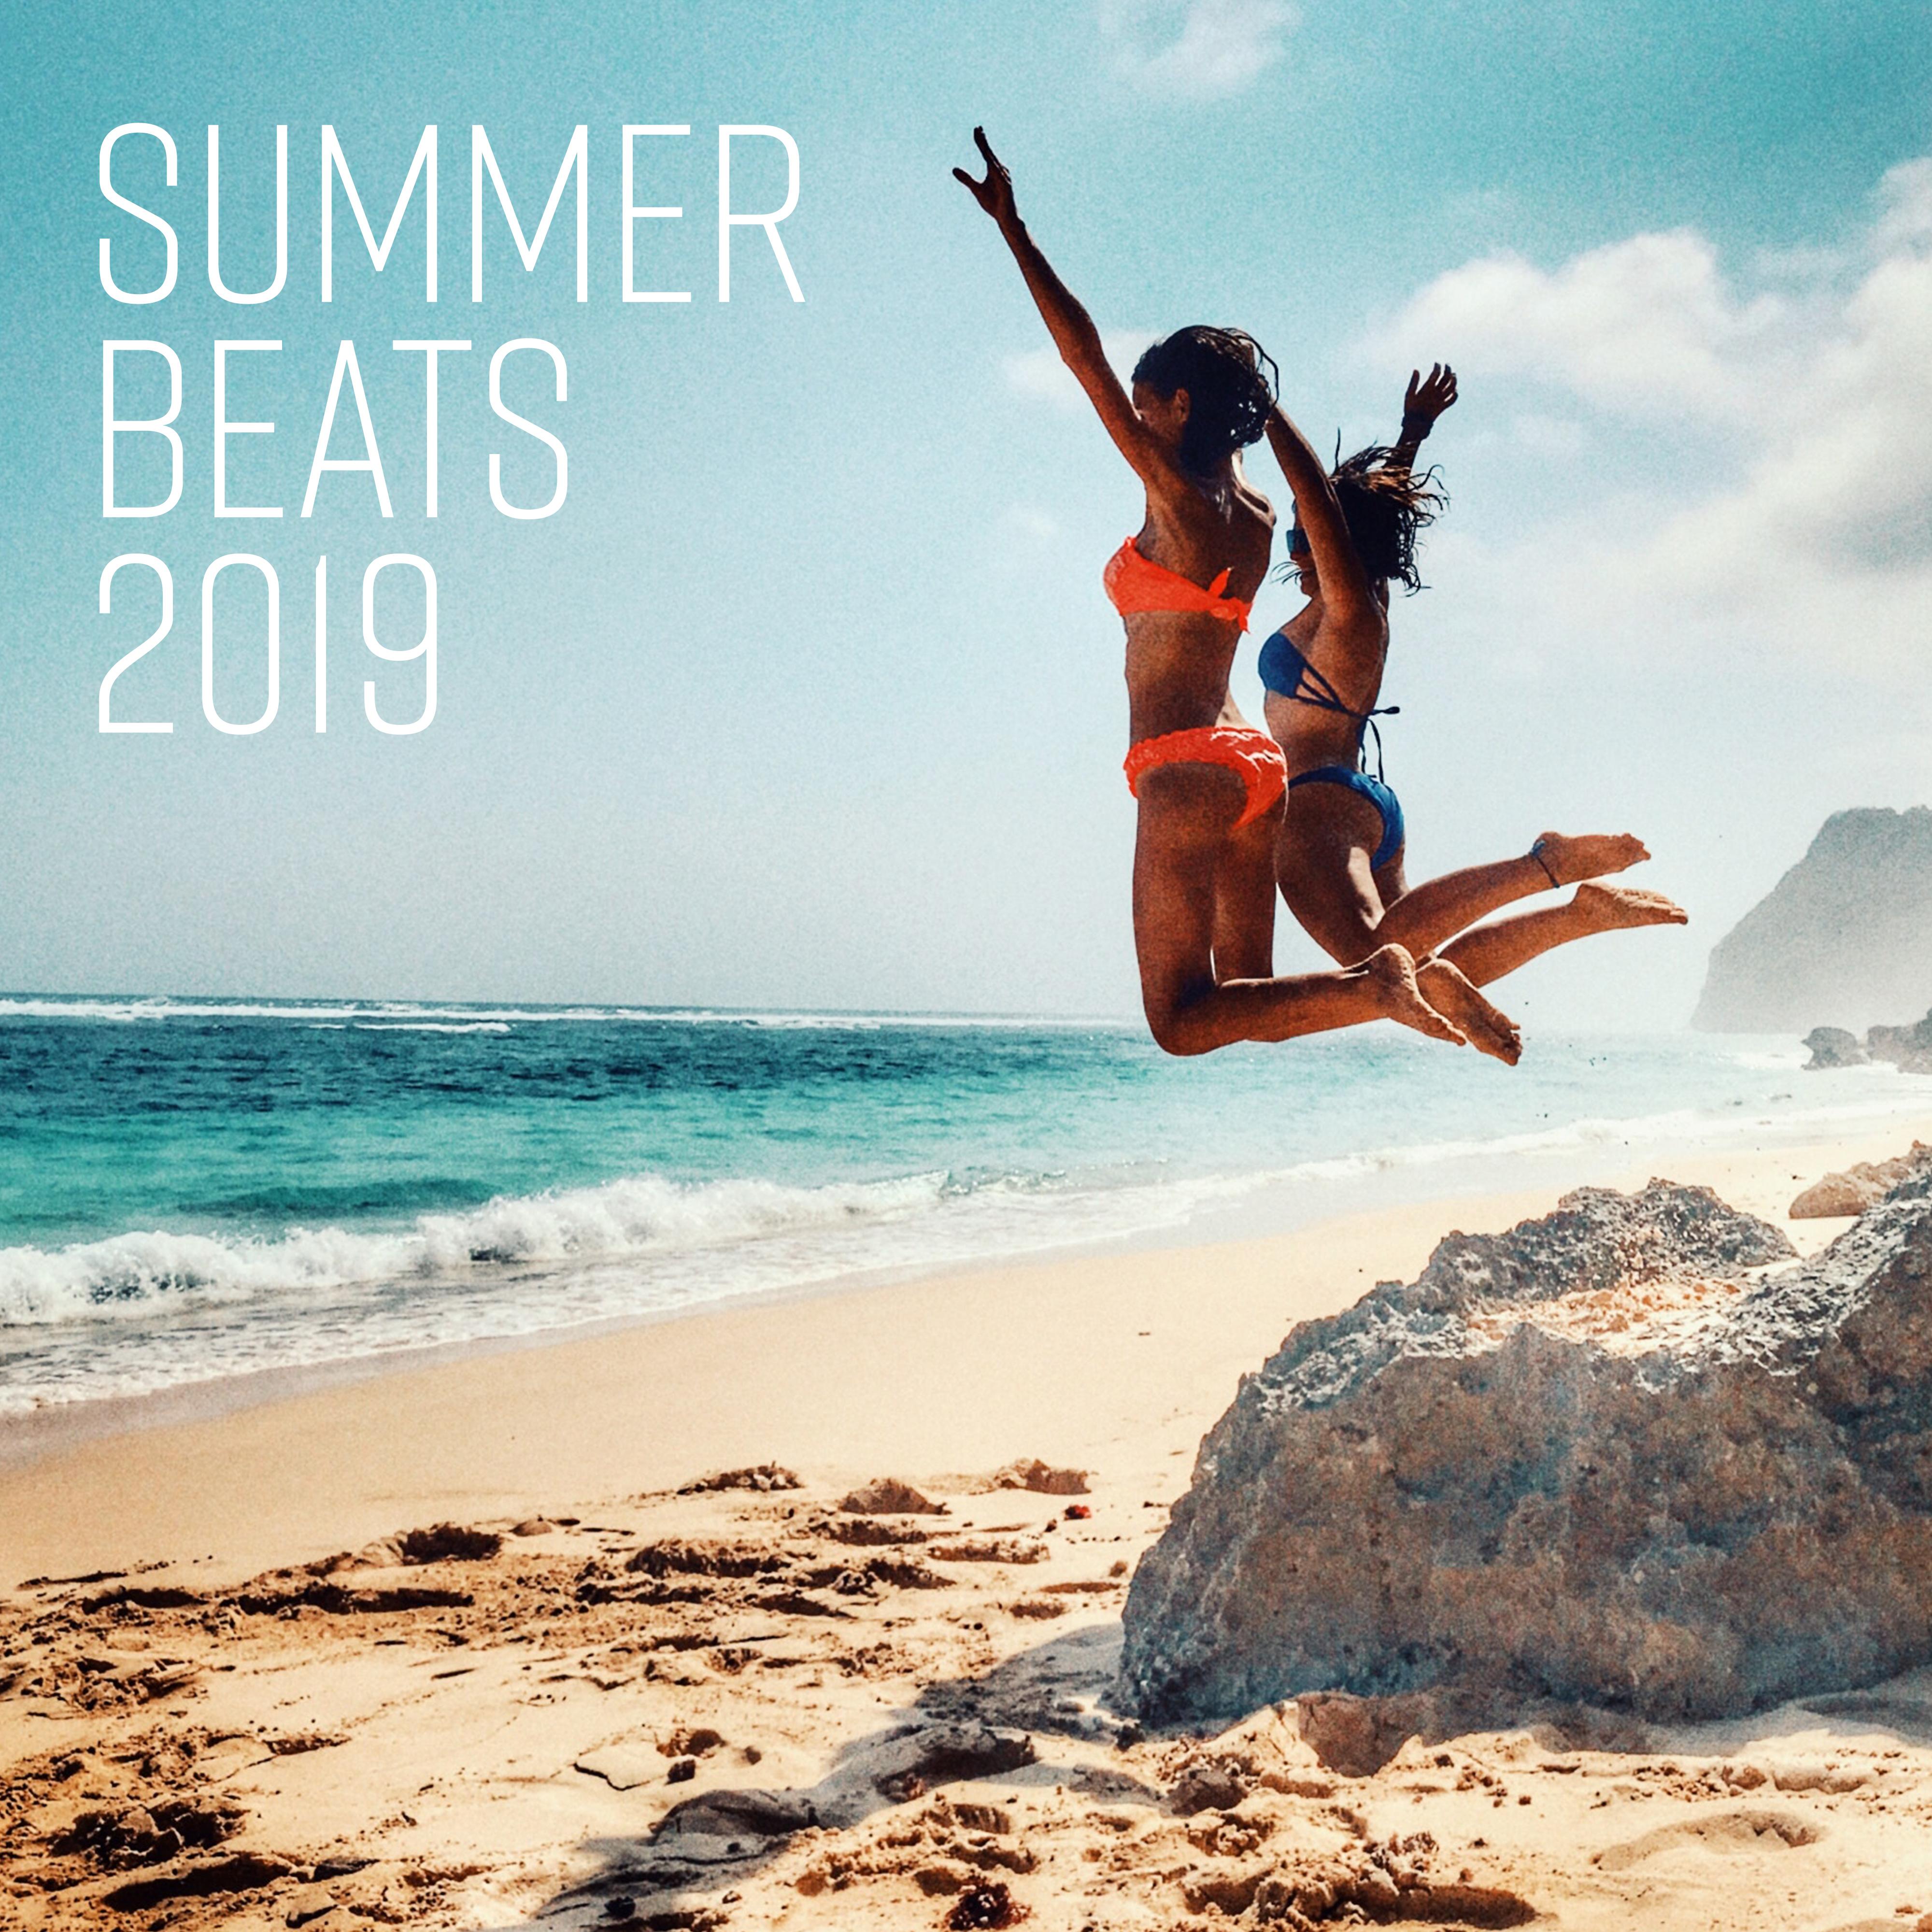 Summer Beats 2019: Sunny Chill Out, Relaxing Vibes, Ibiza 2019, Perfect Relax Zone, Ibiza Chill Out